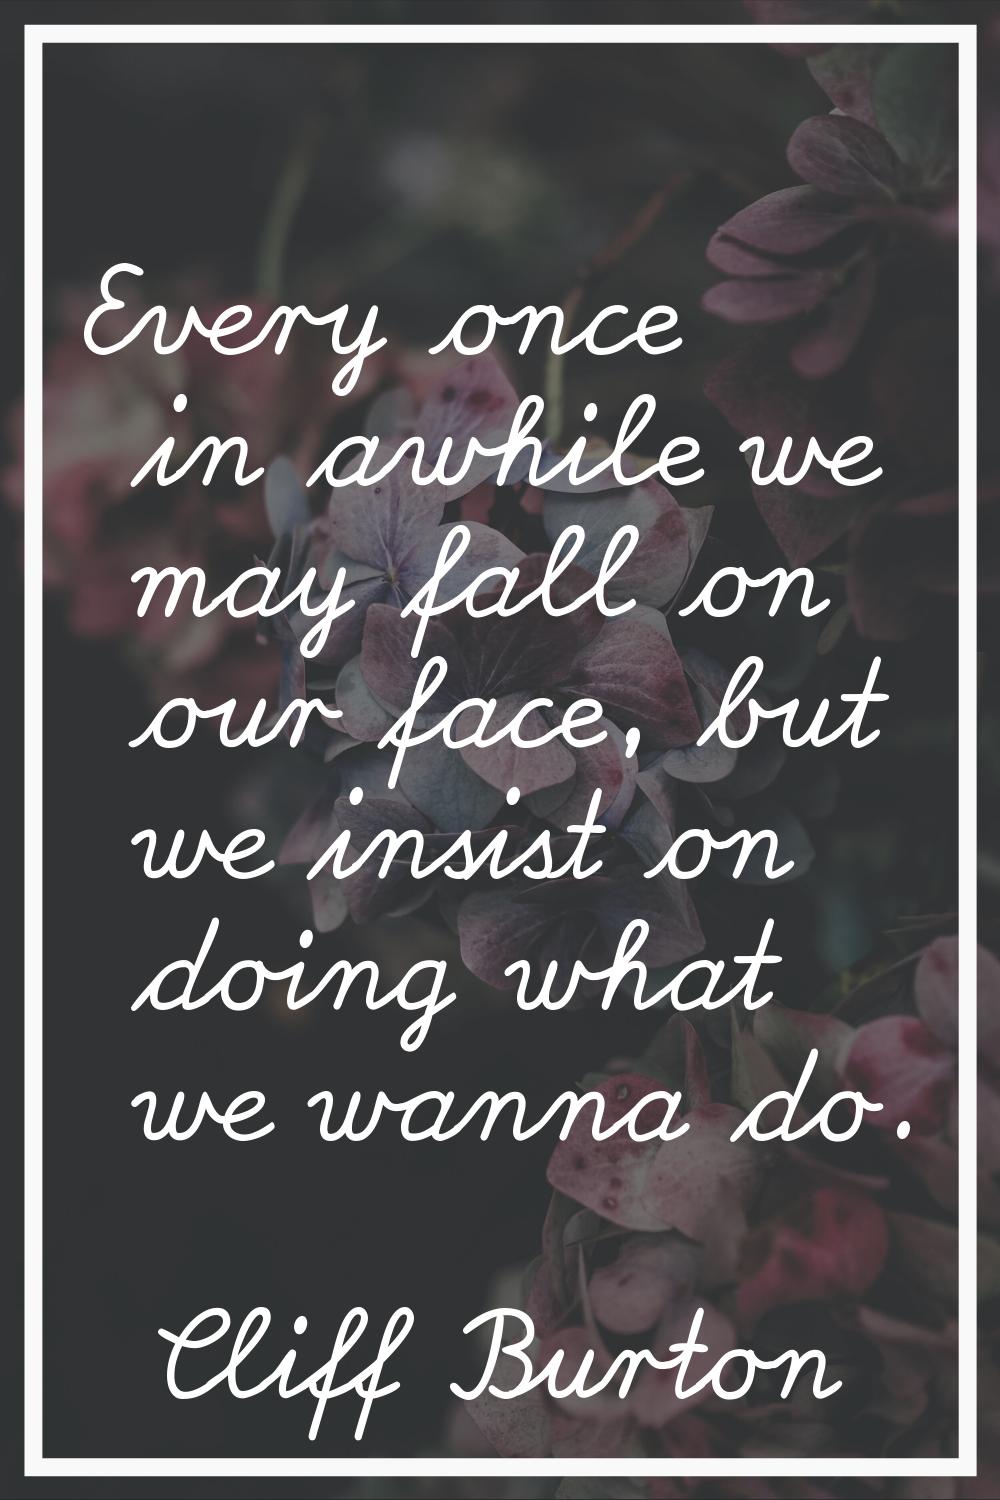 Every once in awhile we may fall on our face, but we insist on doing what we wanna do.